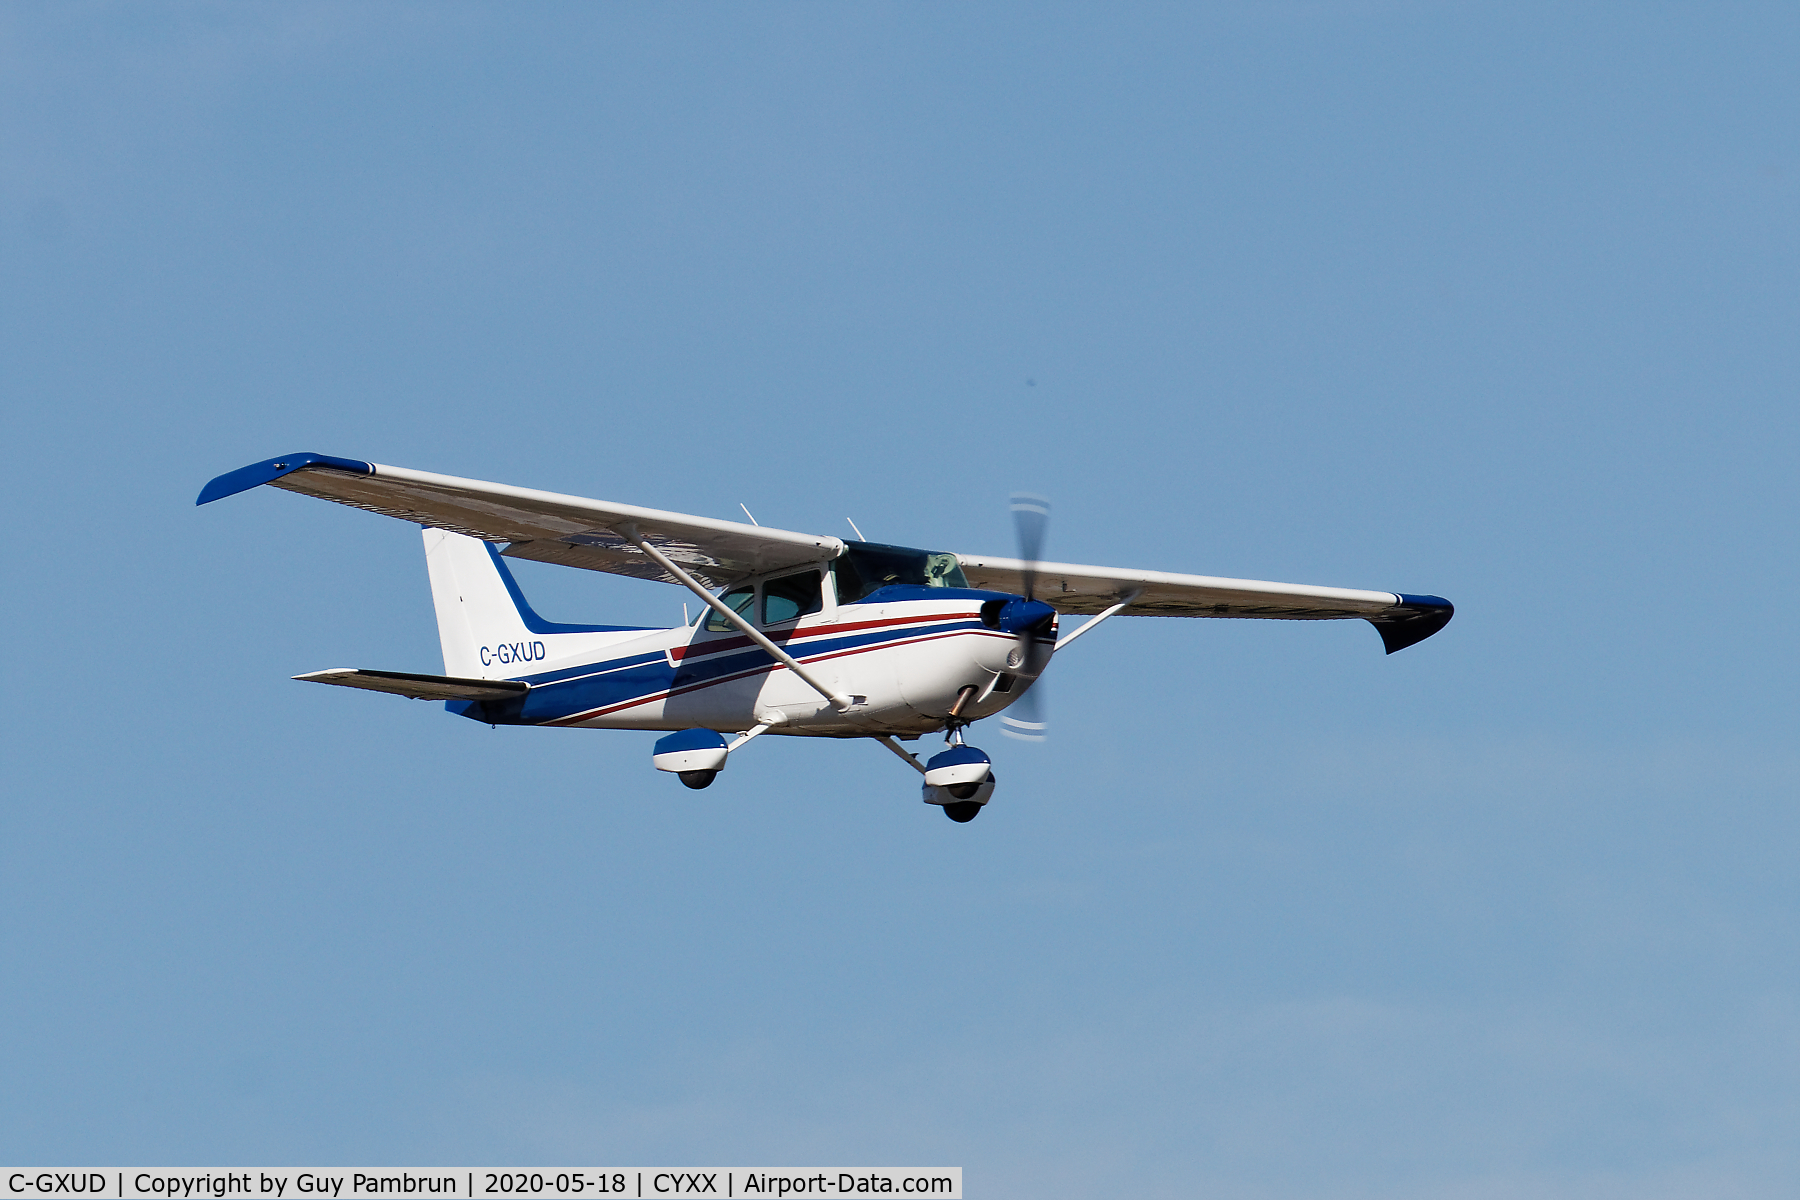 C-GXUD, 1974 Cessna 172M C/N 17262500, Landing on 19 for pilot briefing and departure to take part in 